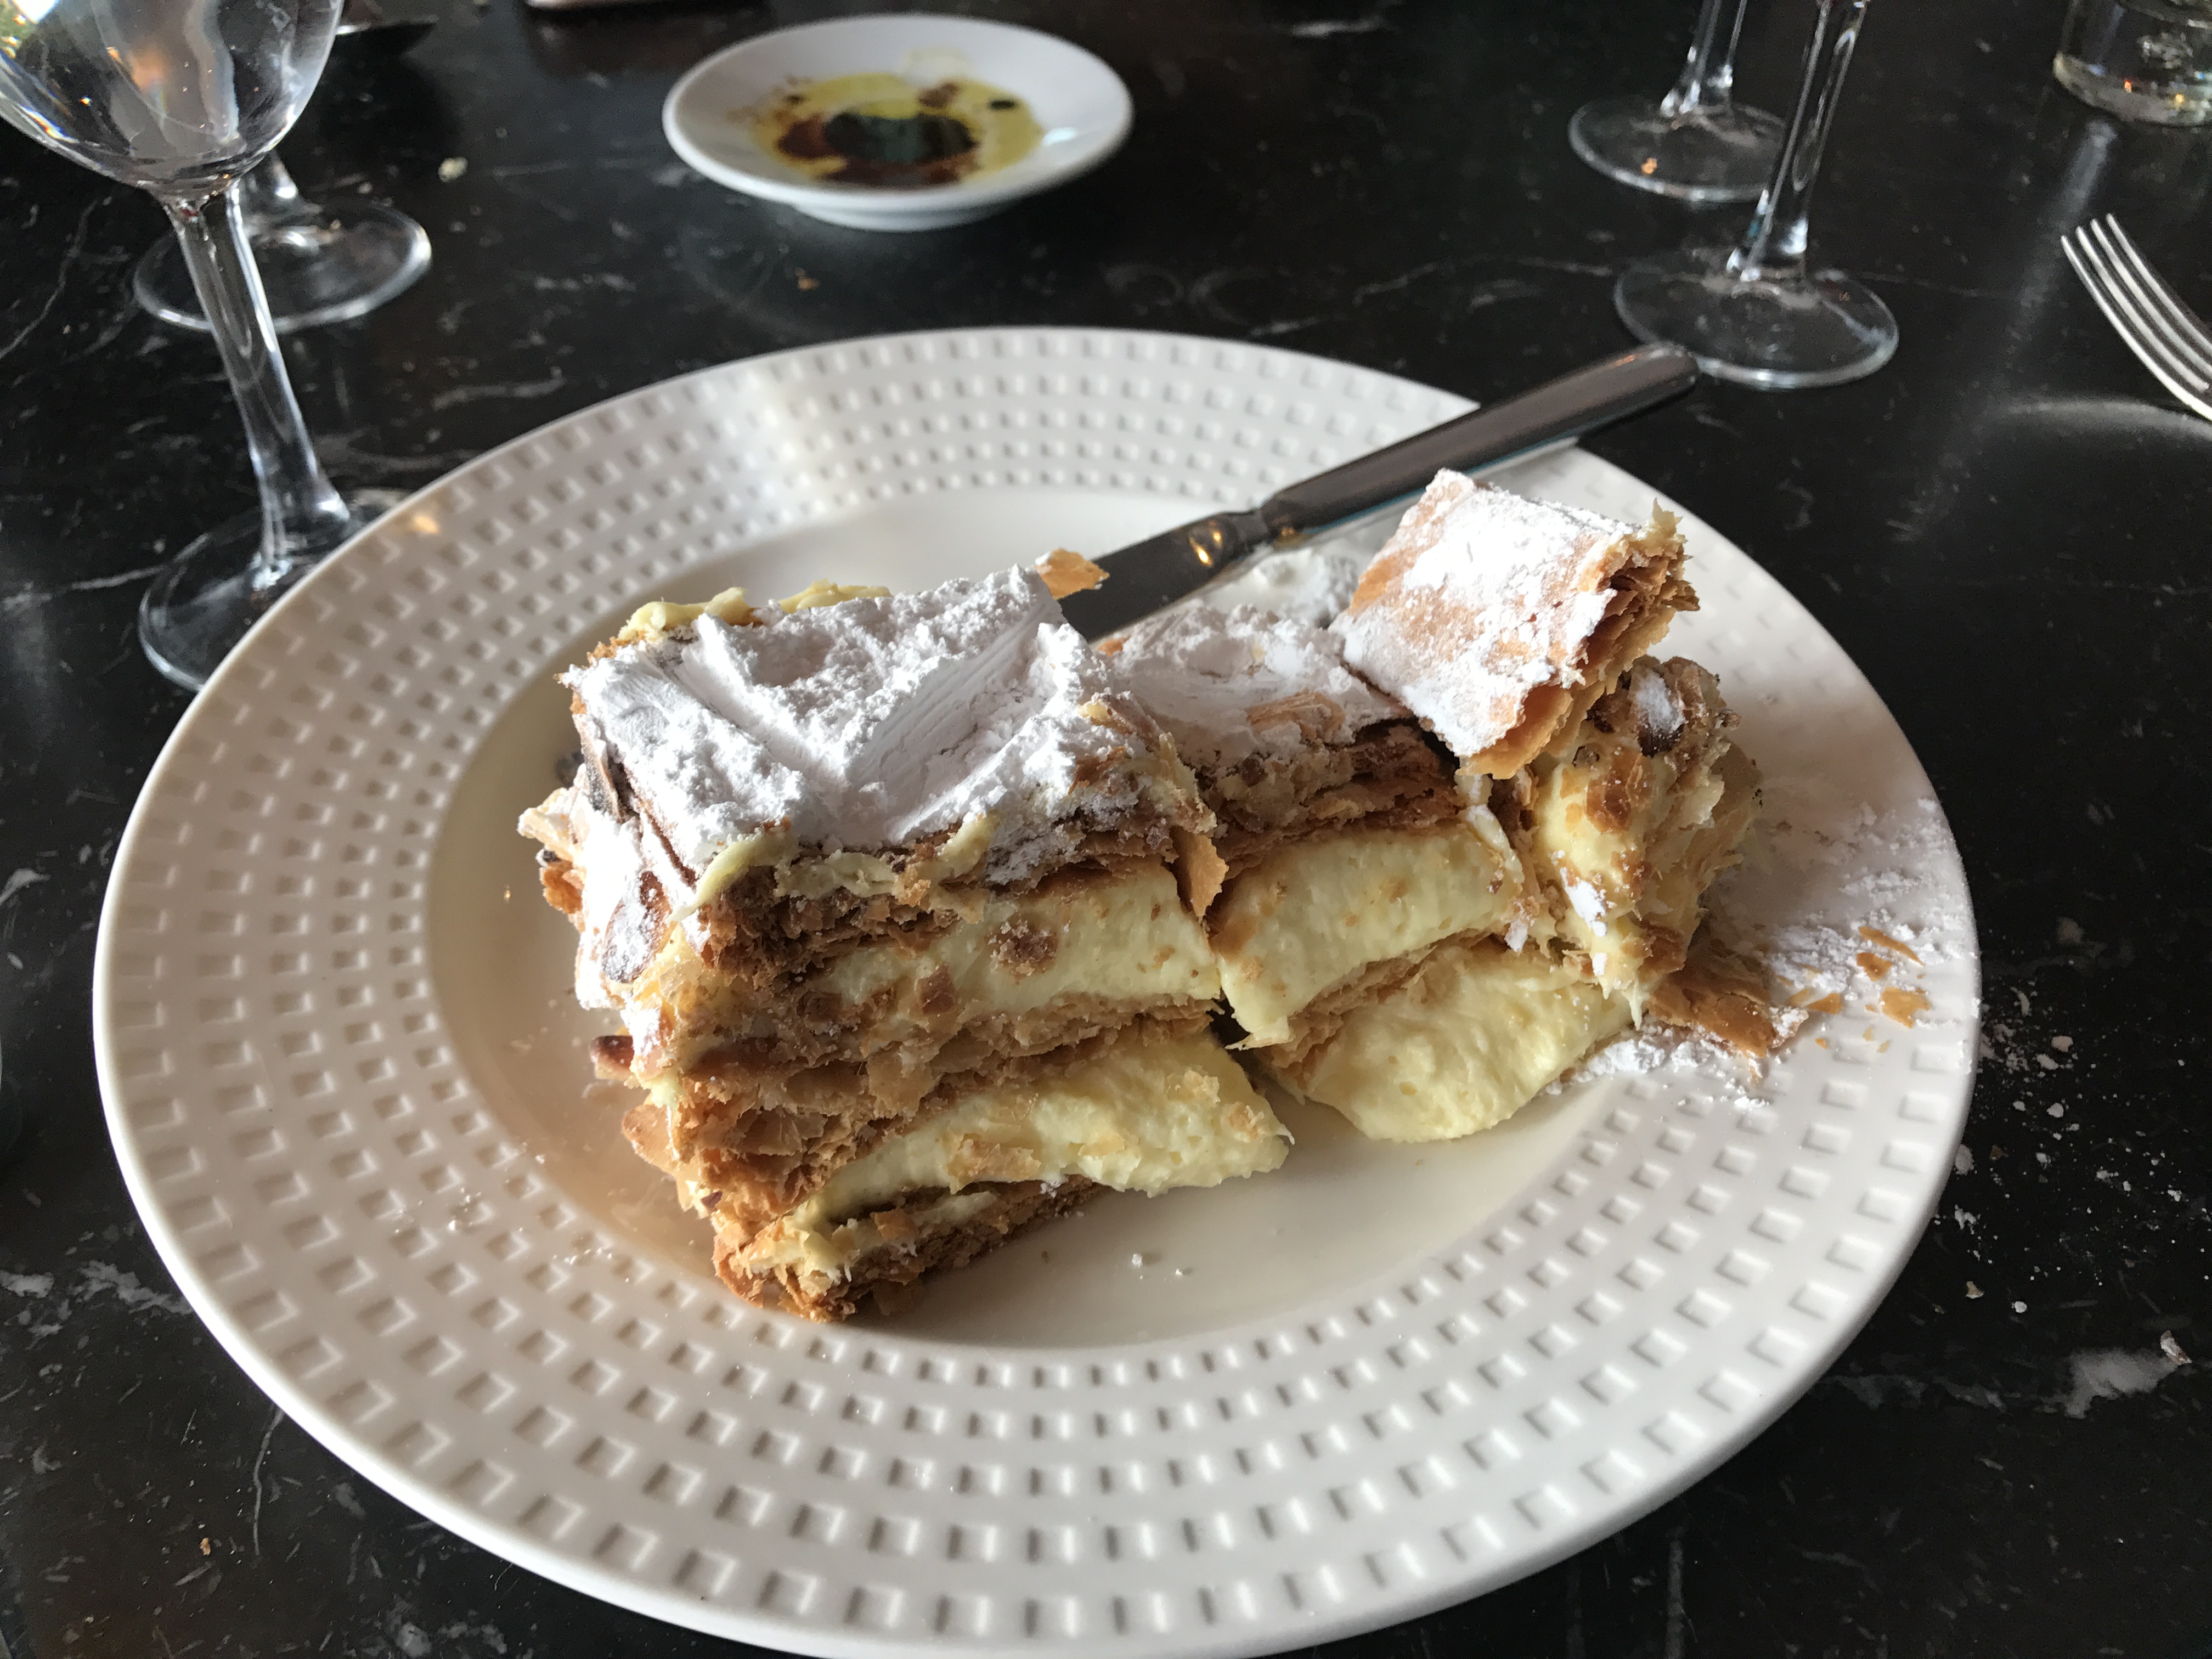 French Vanilla Slices (Mille-feuilles) abutler433